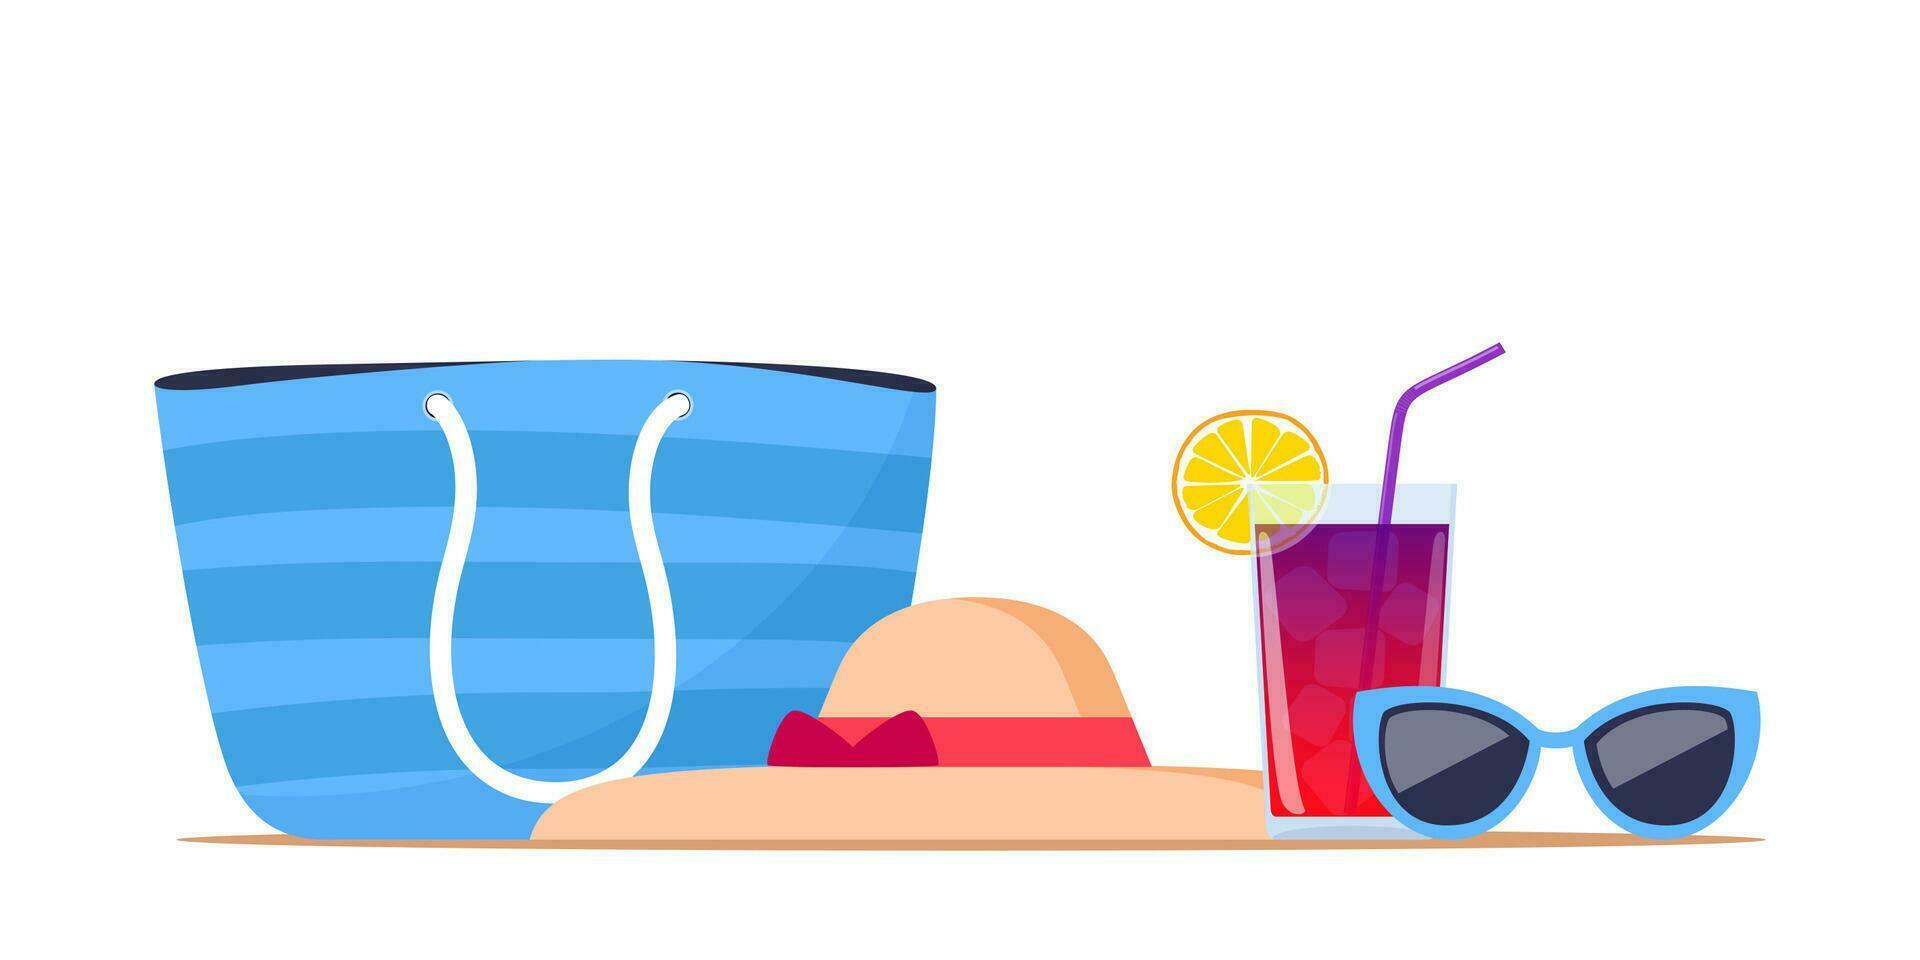 Summer beach elements, set. Summer colorful objects collection for outdoor trip vacation. Vector illustration.